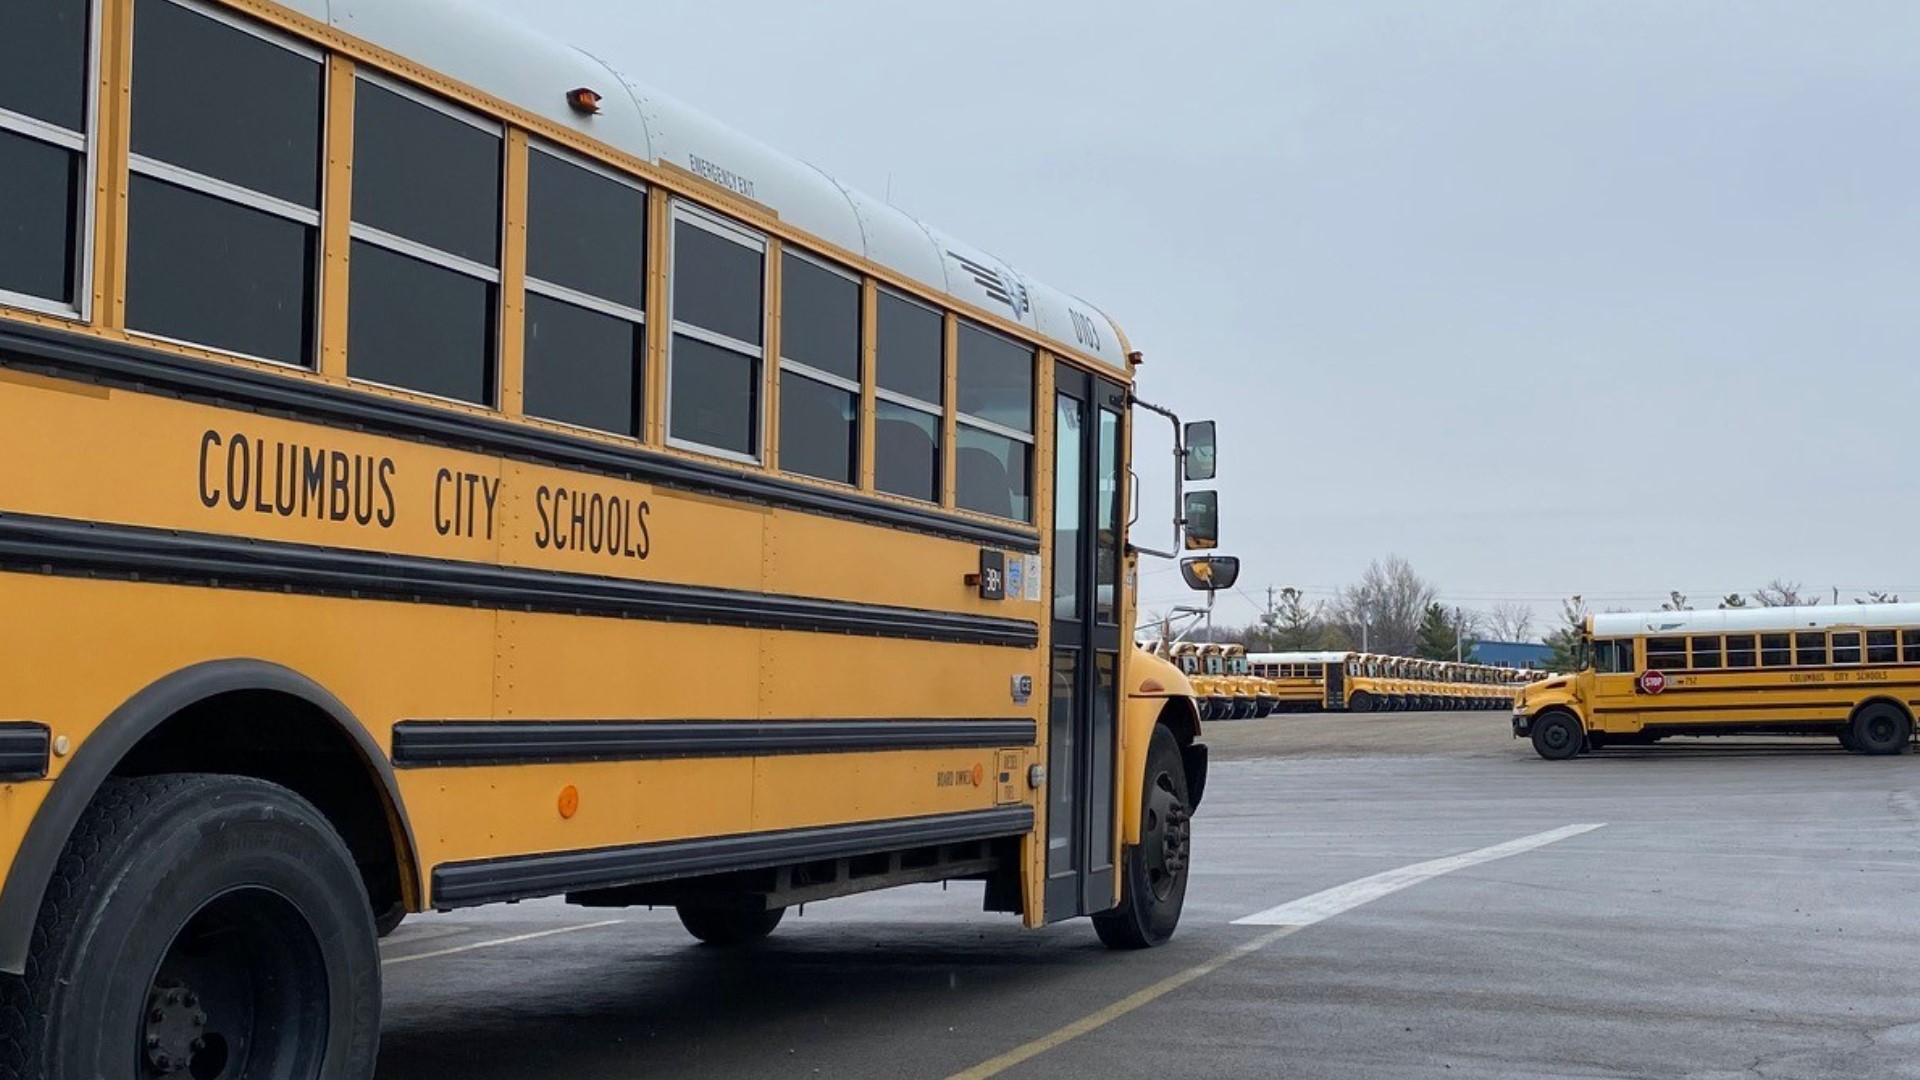 A driver shortage combined with a software issue is what ultimately led district leaders to decide to overhaul the bus transportation system.